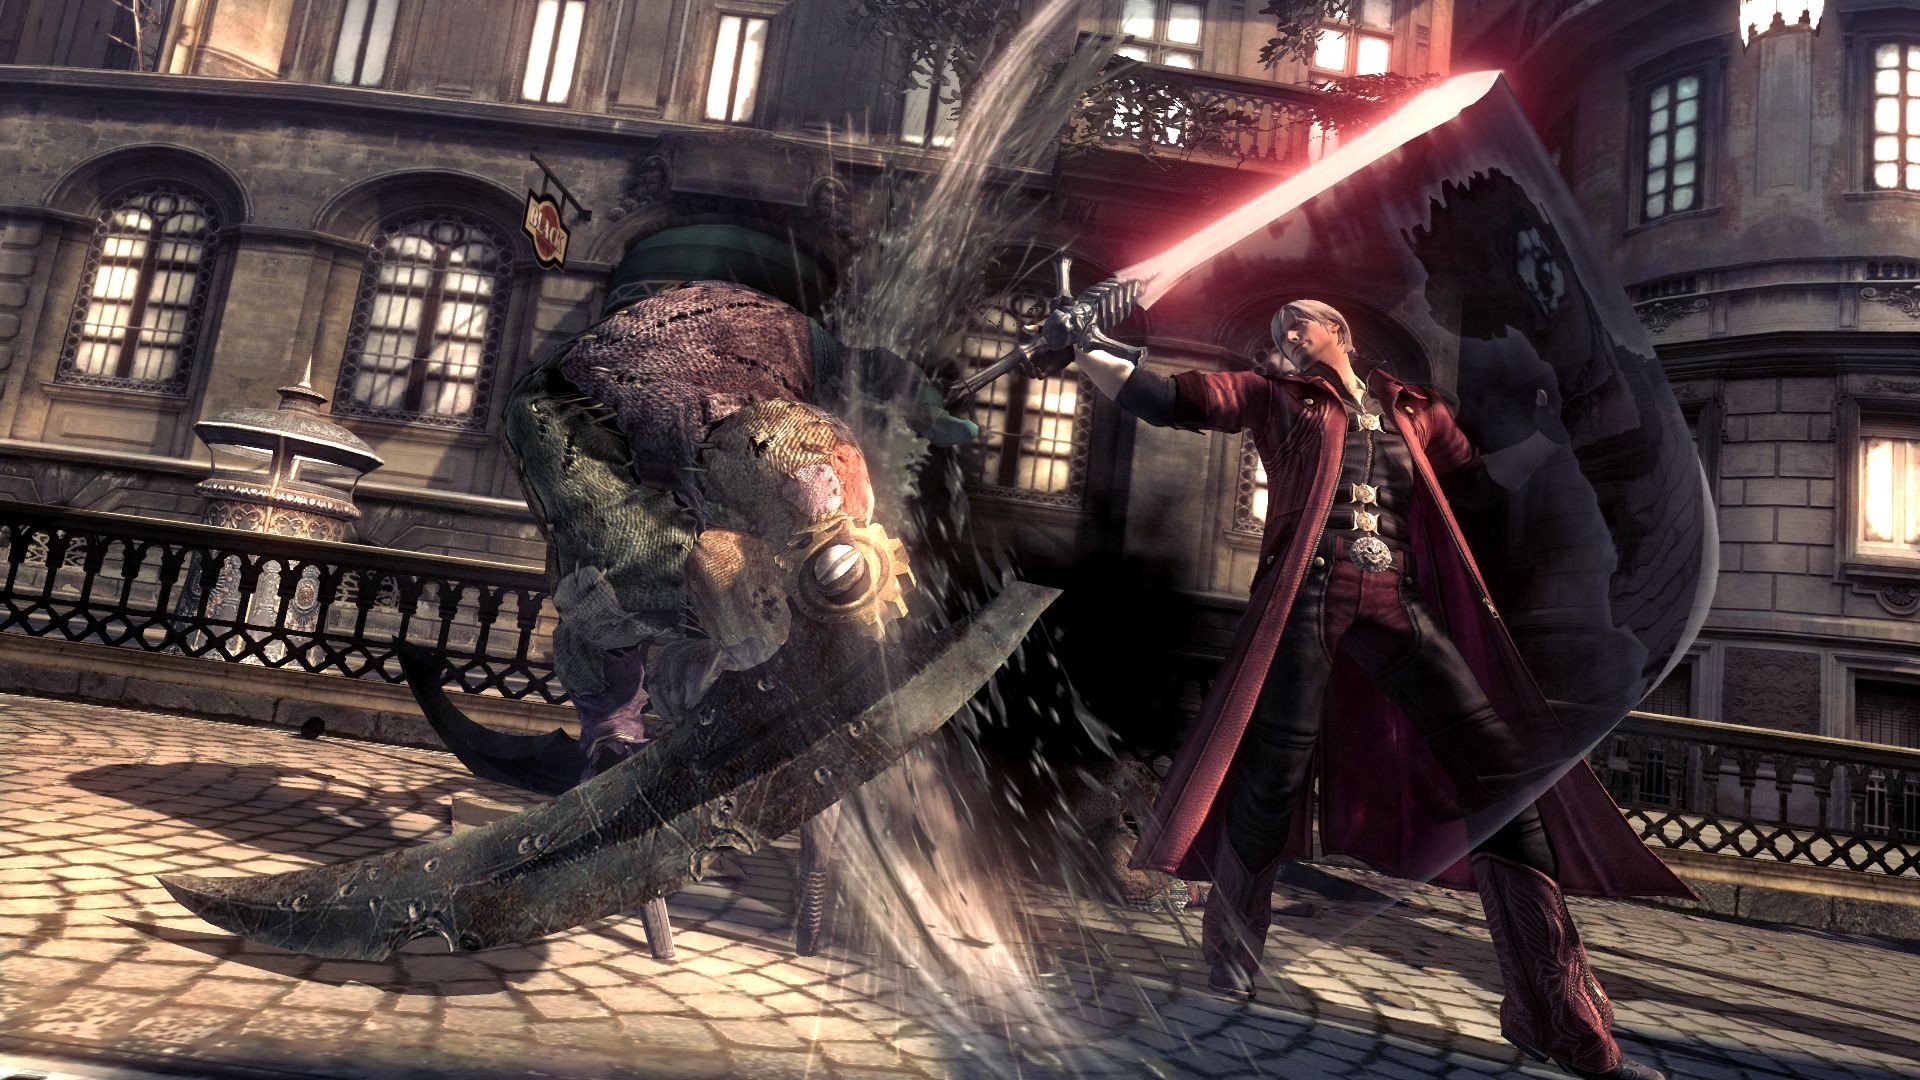 Comprar Devil May Cry 4: Special Edition Steam